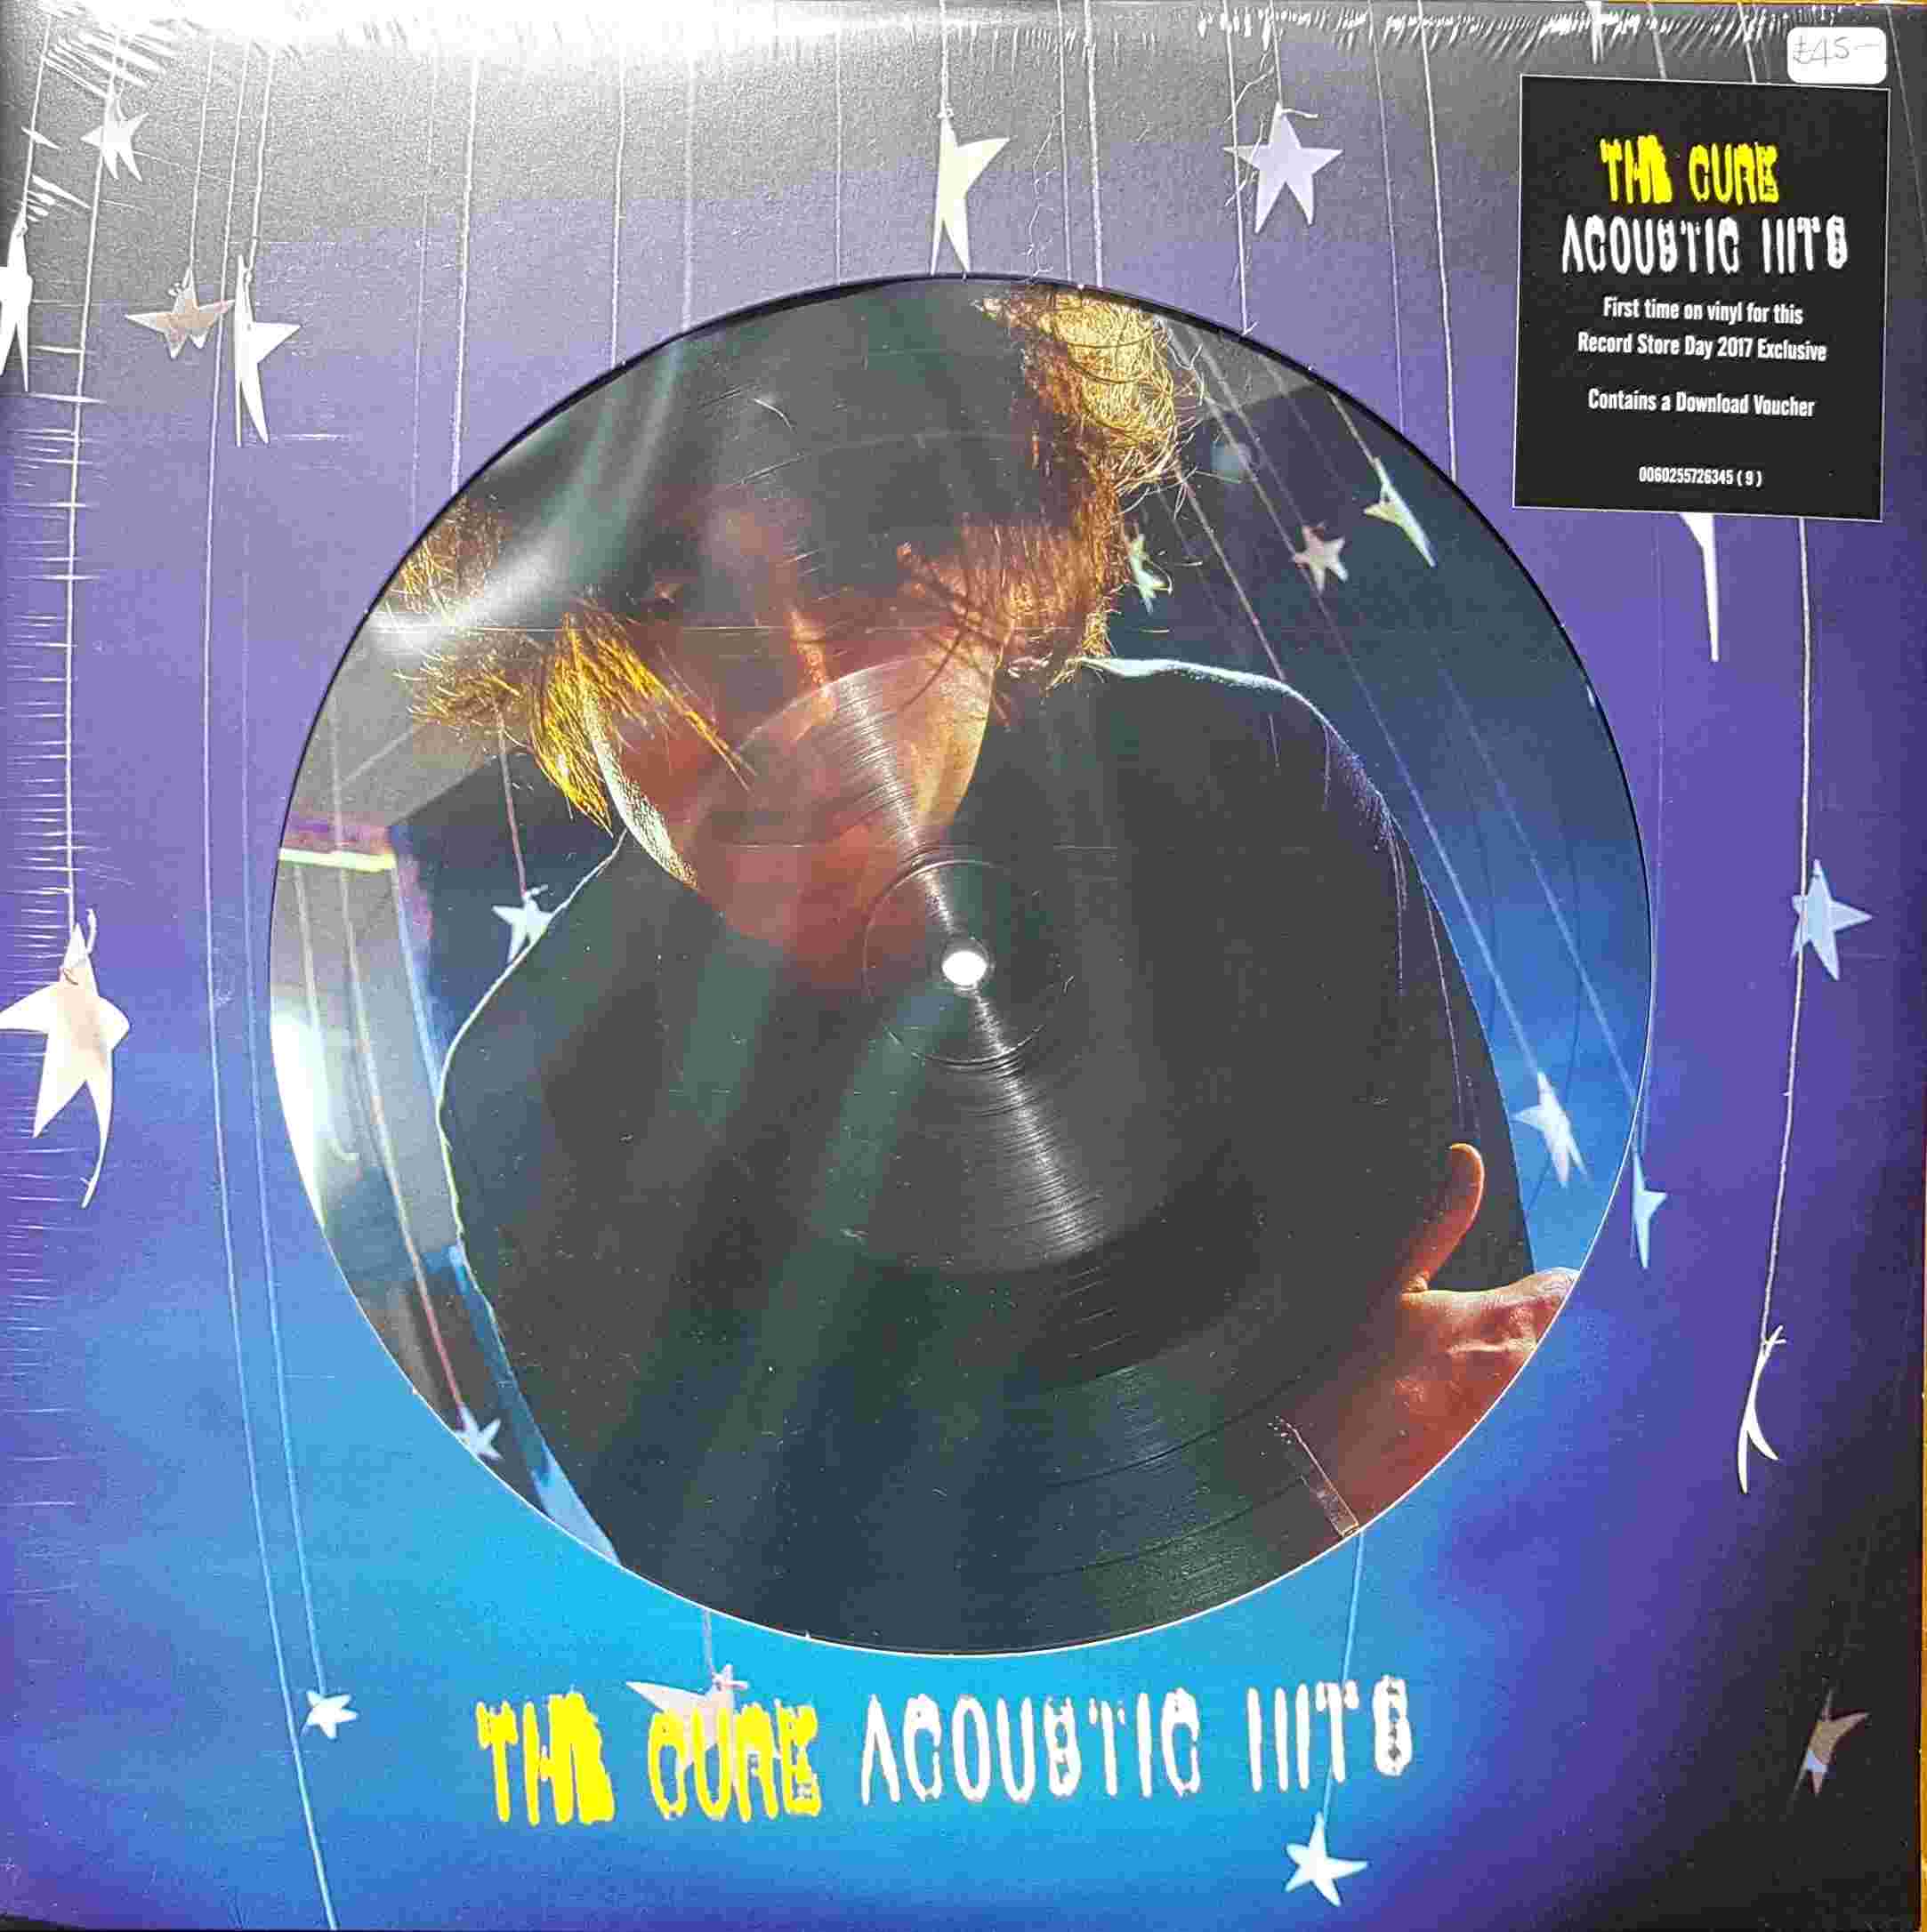 Picture of 572634 - 5 Acoustic hits - Limited edition picture discs - Record Store Day 2017 by artist The Cure  from The Stranglers albums